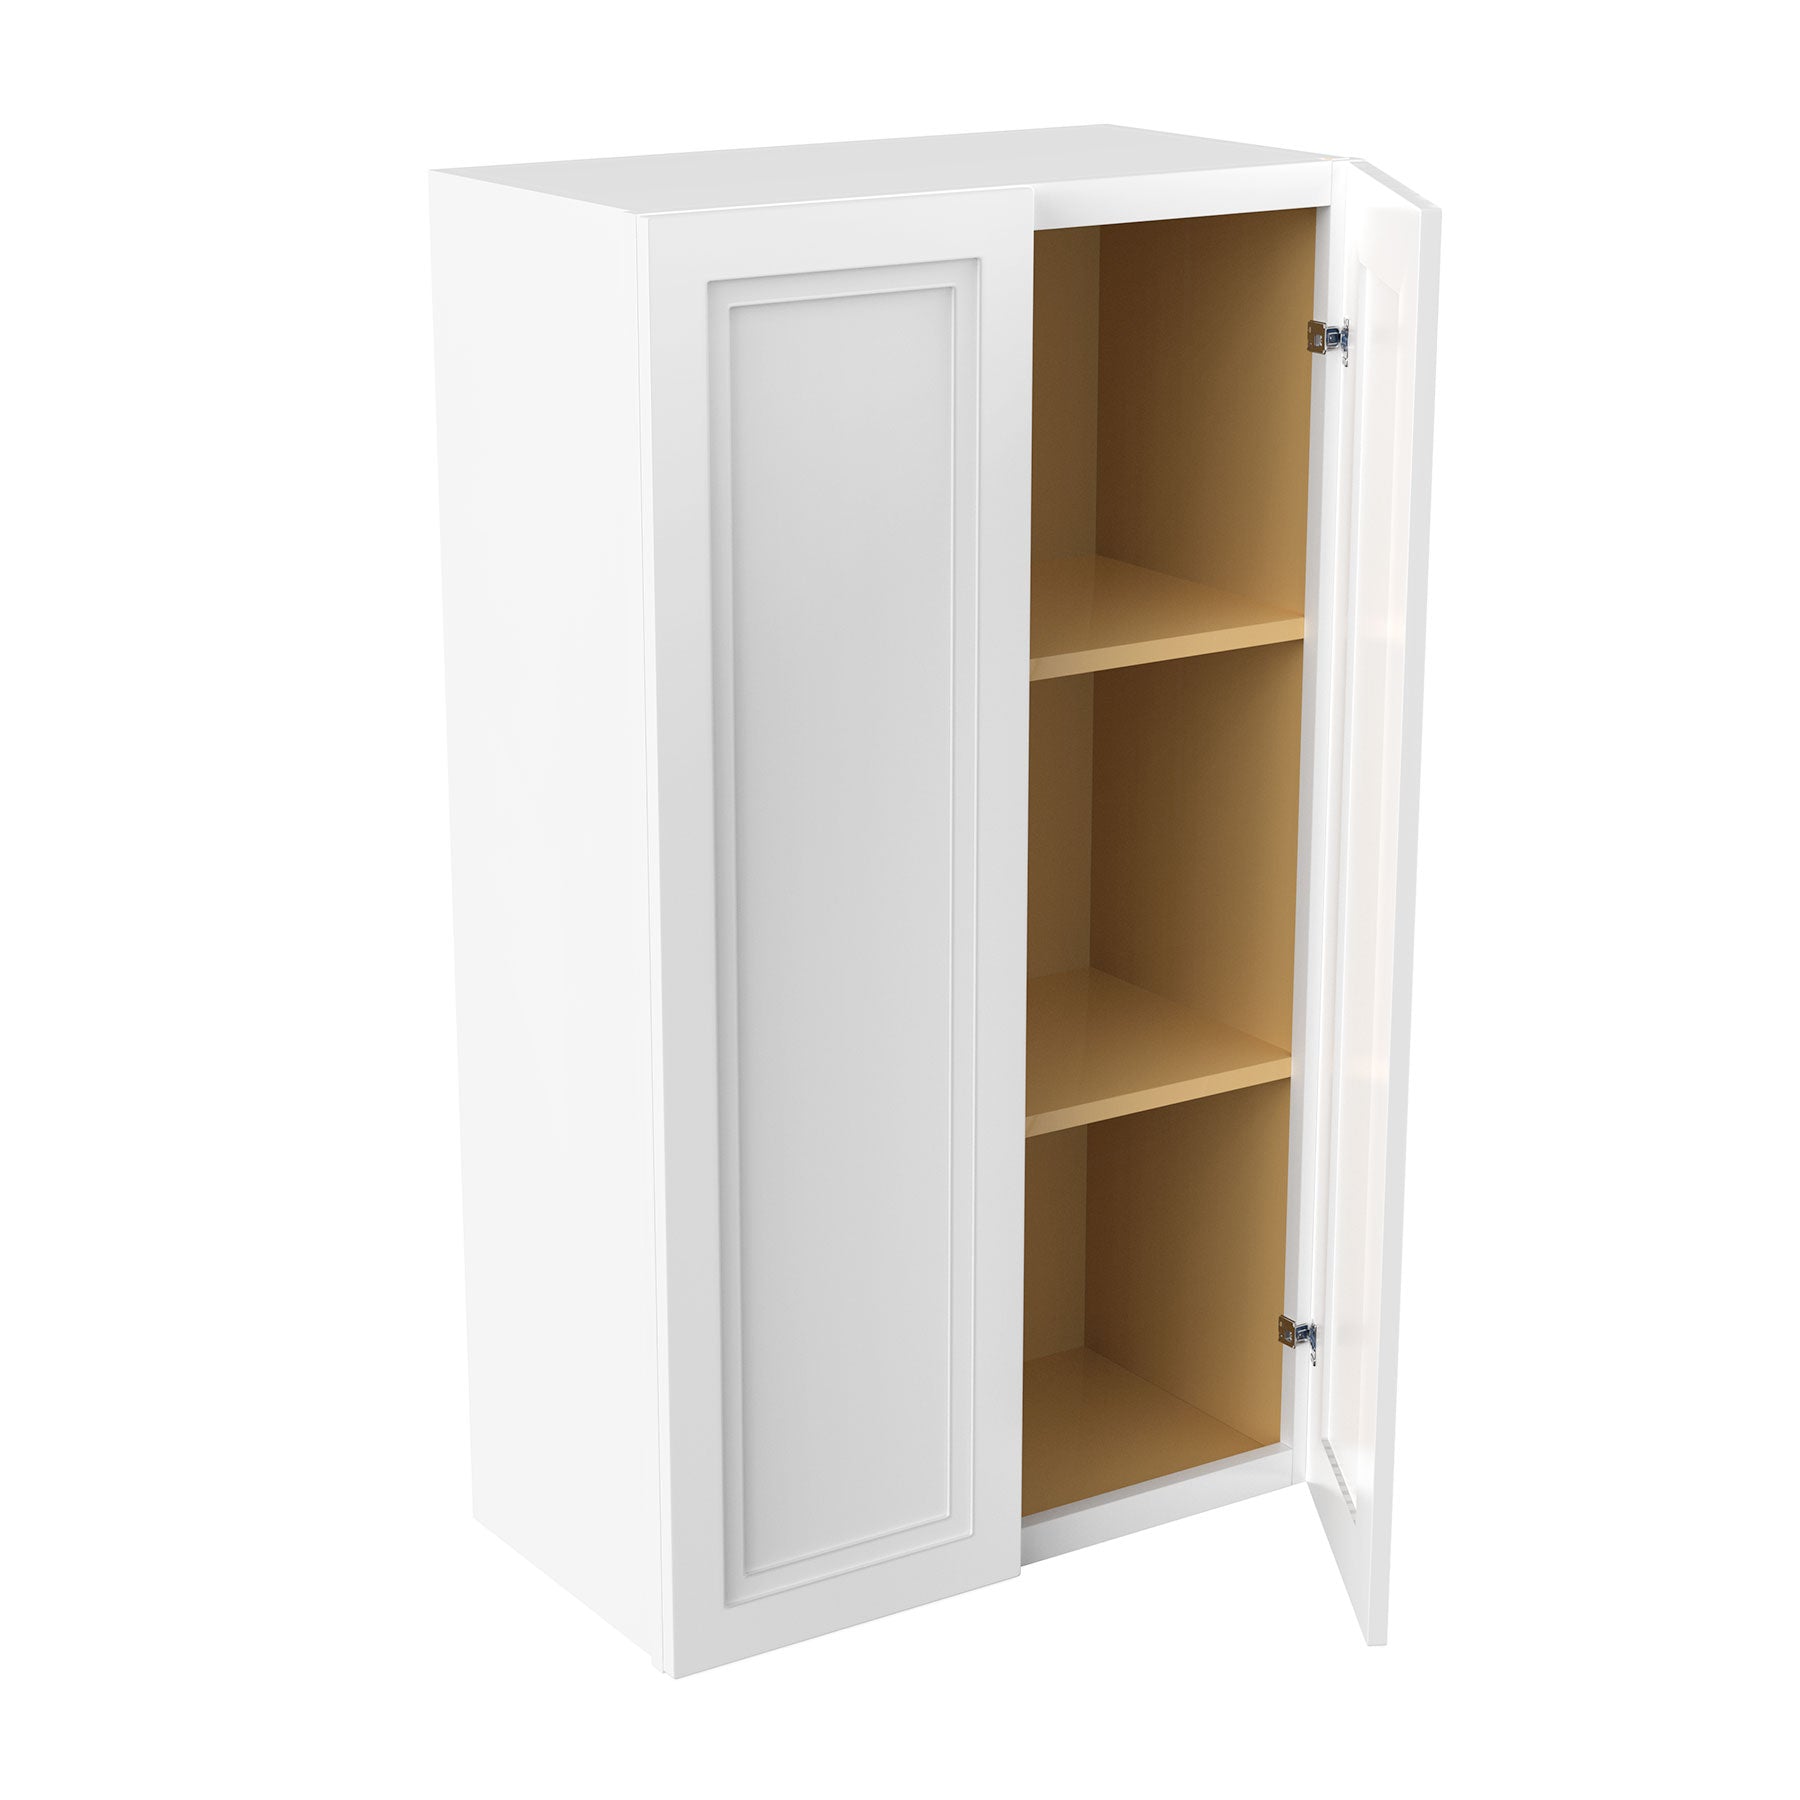 Fashion White - Double Door Wall Cabinet | 24"W x 42"H x 12"D